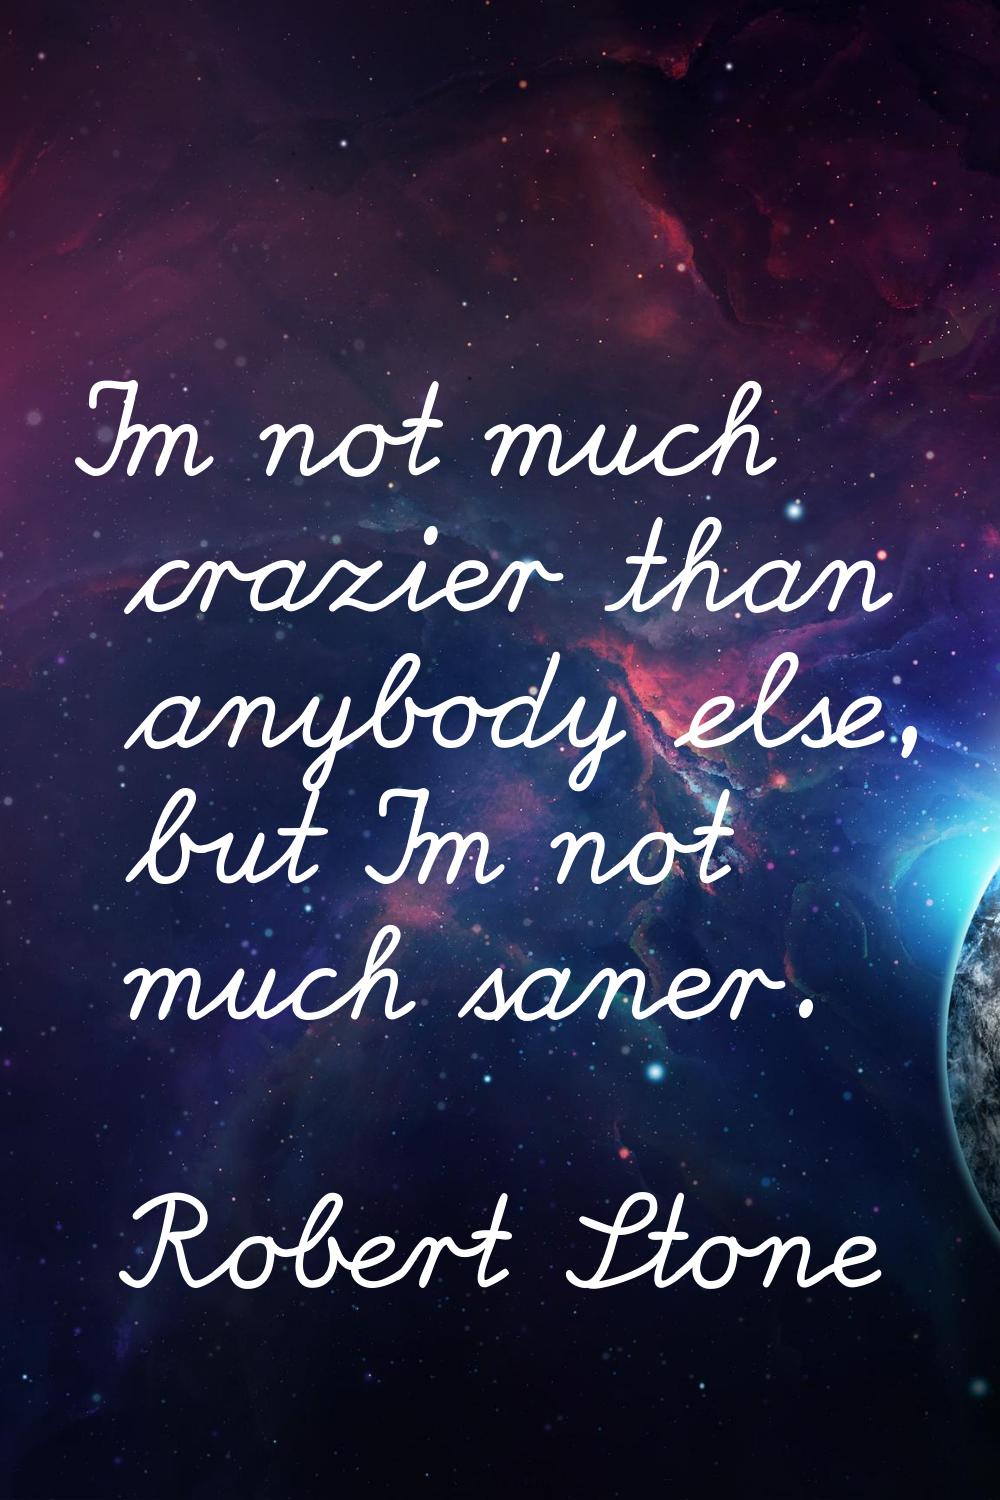 I'm not much crazier than anybody else, but I'm not much saner.